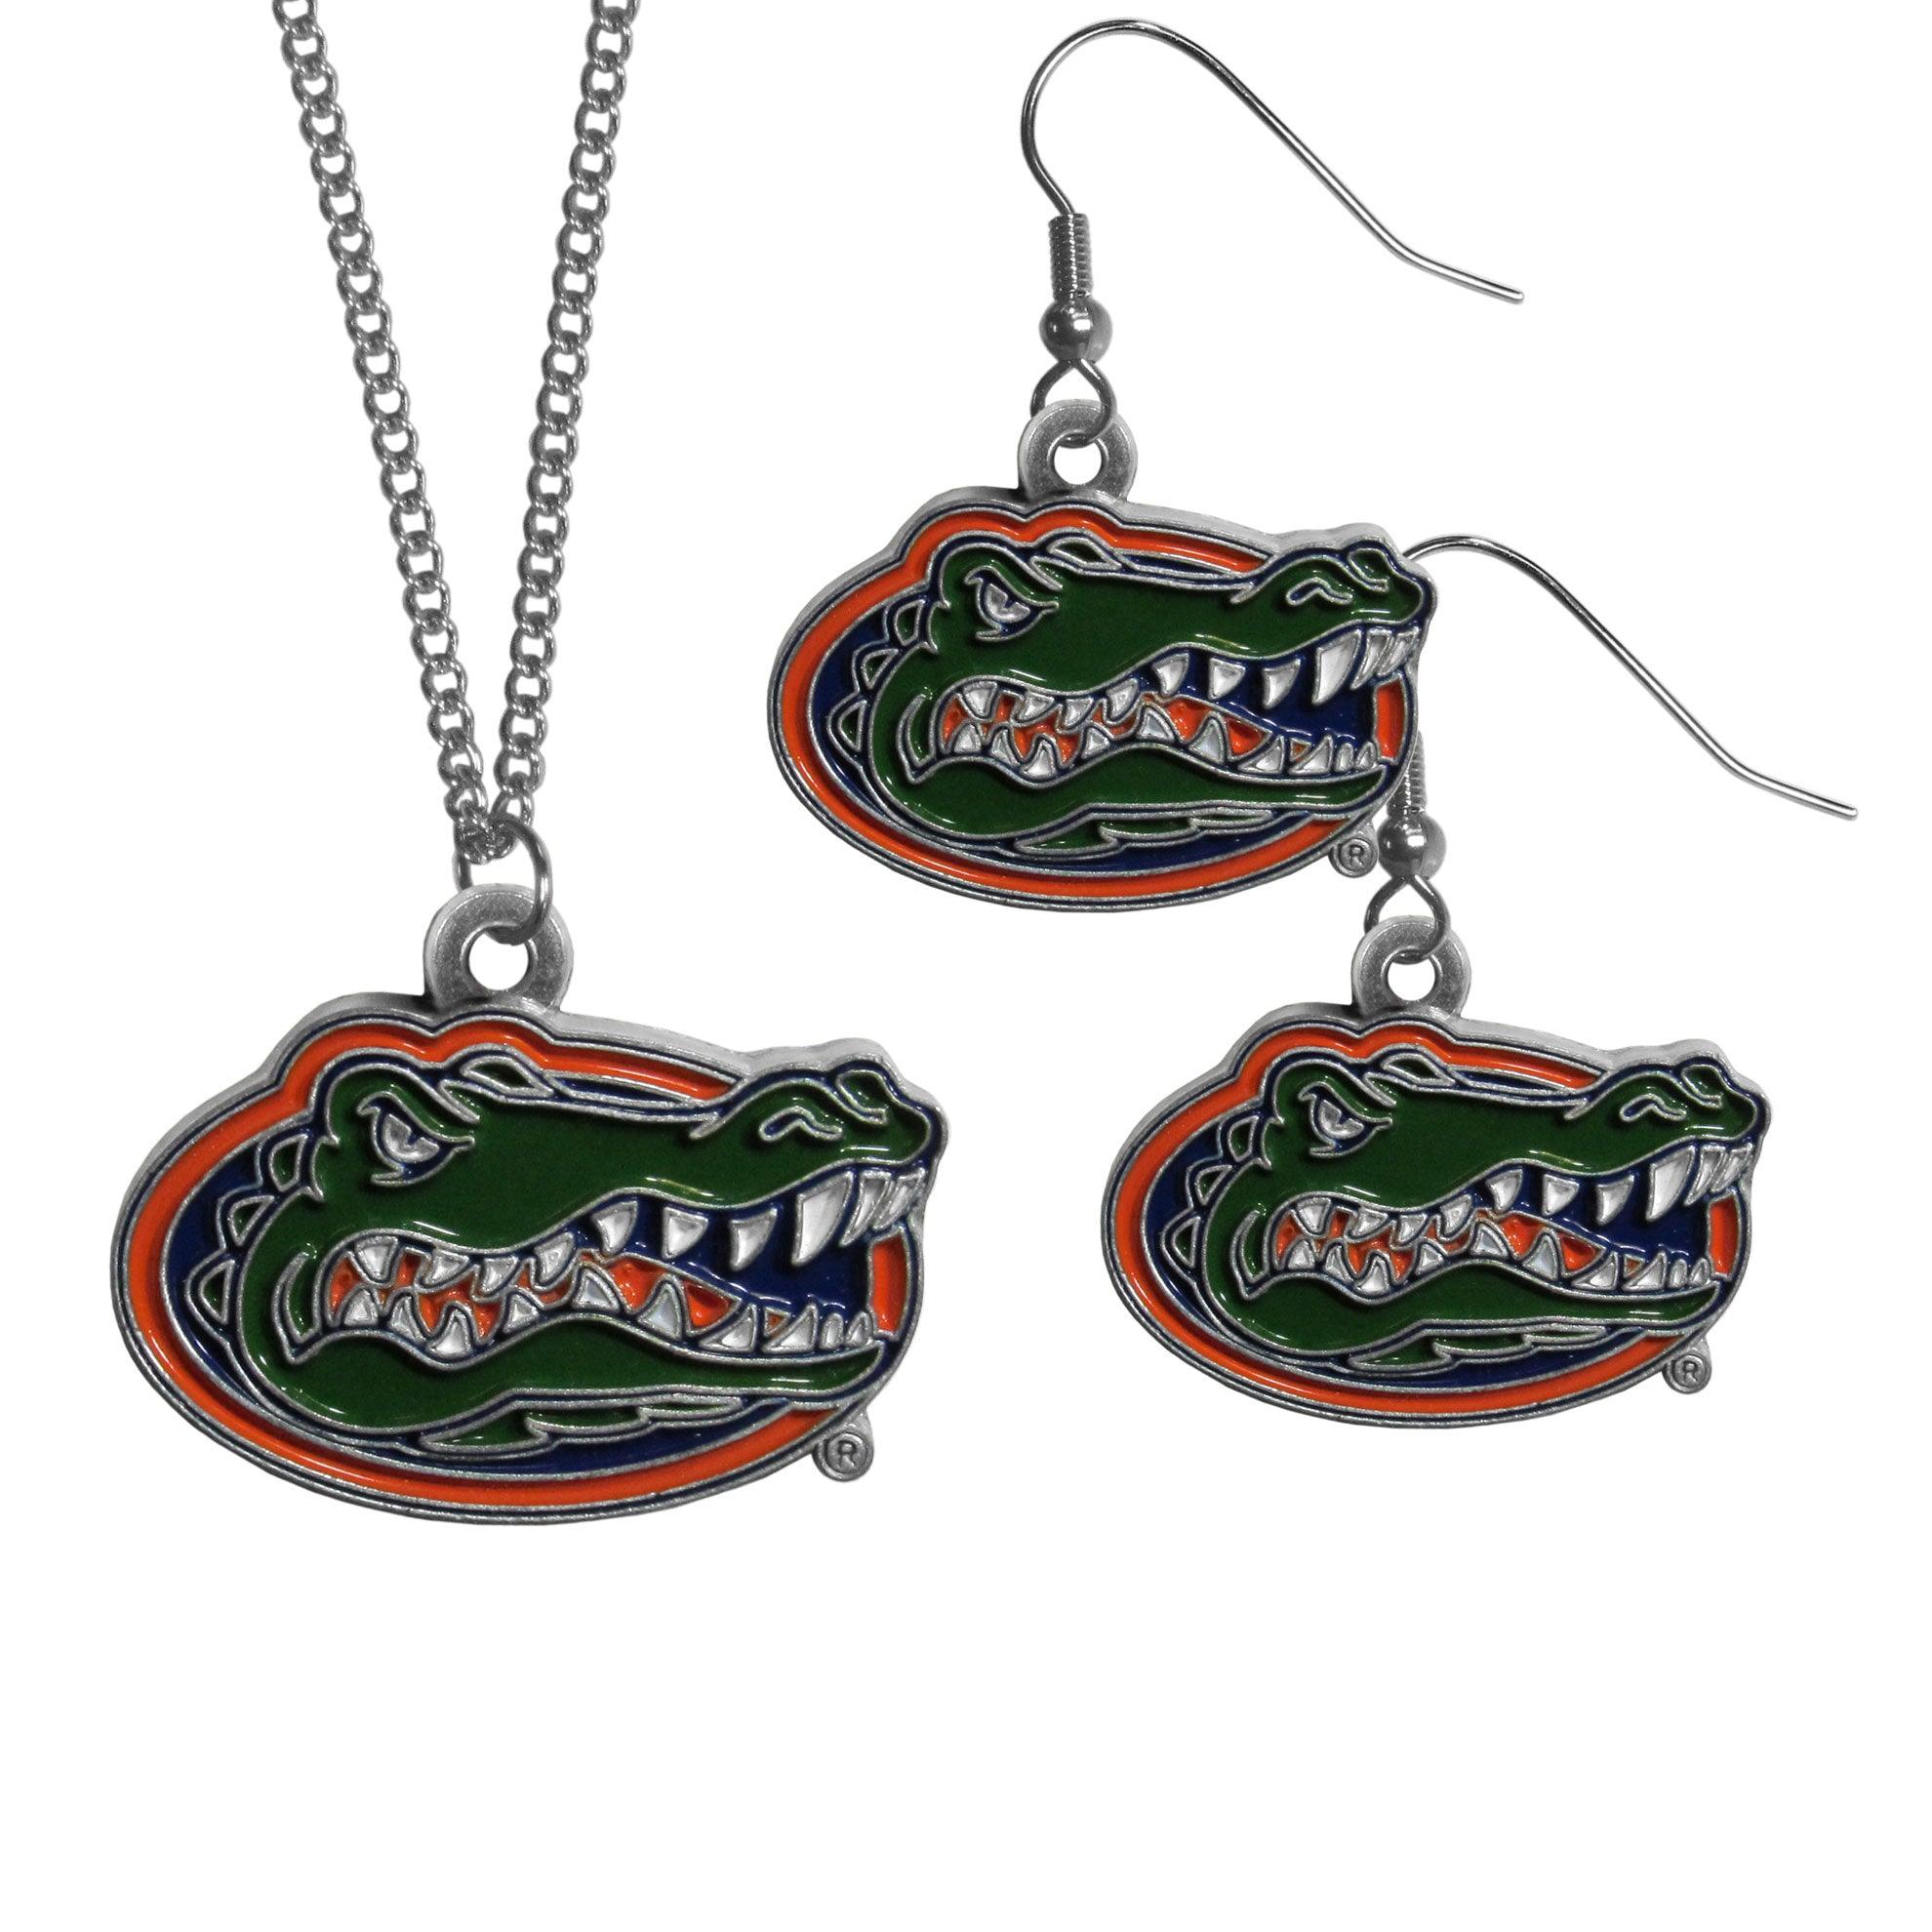 Florida Gators Dangle Earrings and Chain Necklace Set - Flyclothing LLC